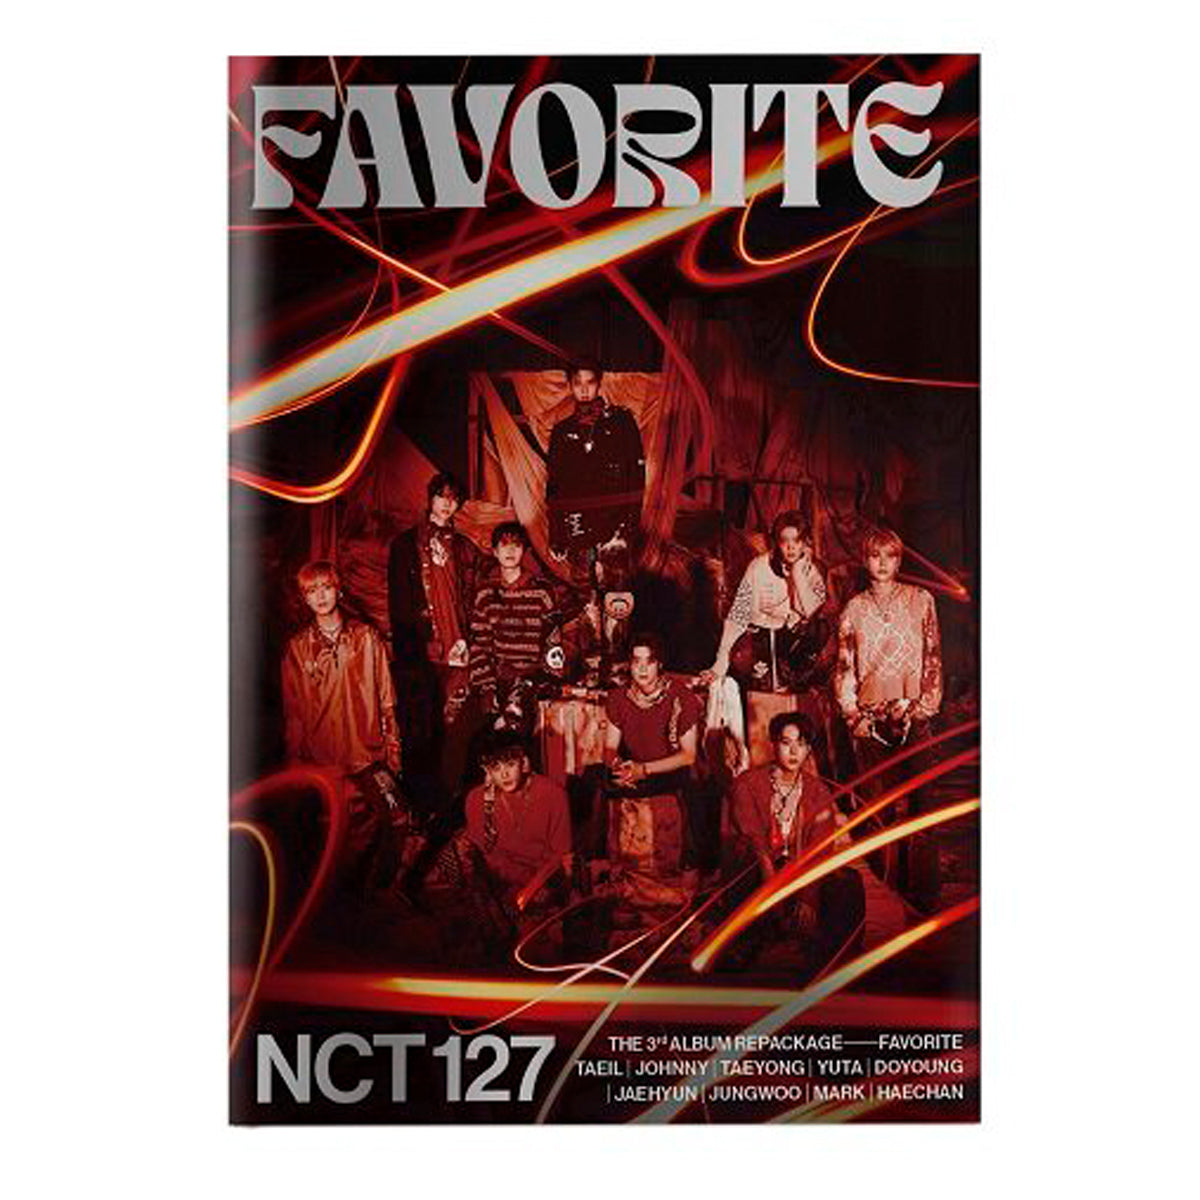 NCT 127 3RD ALBUM REPACKAGE 'FAVORITE' CATHARSIS COVER